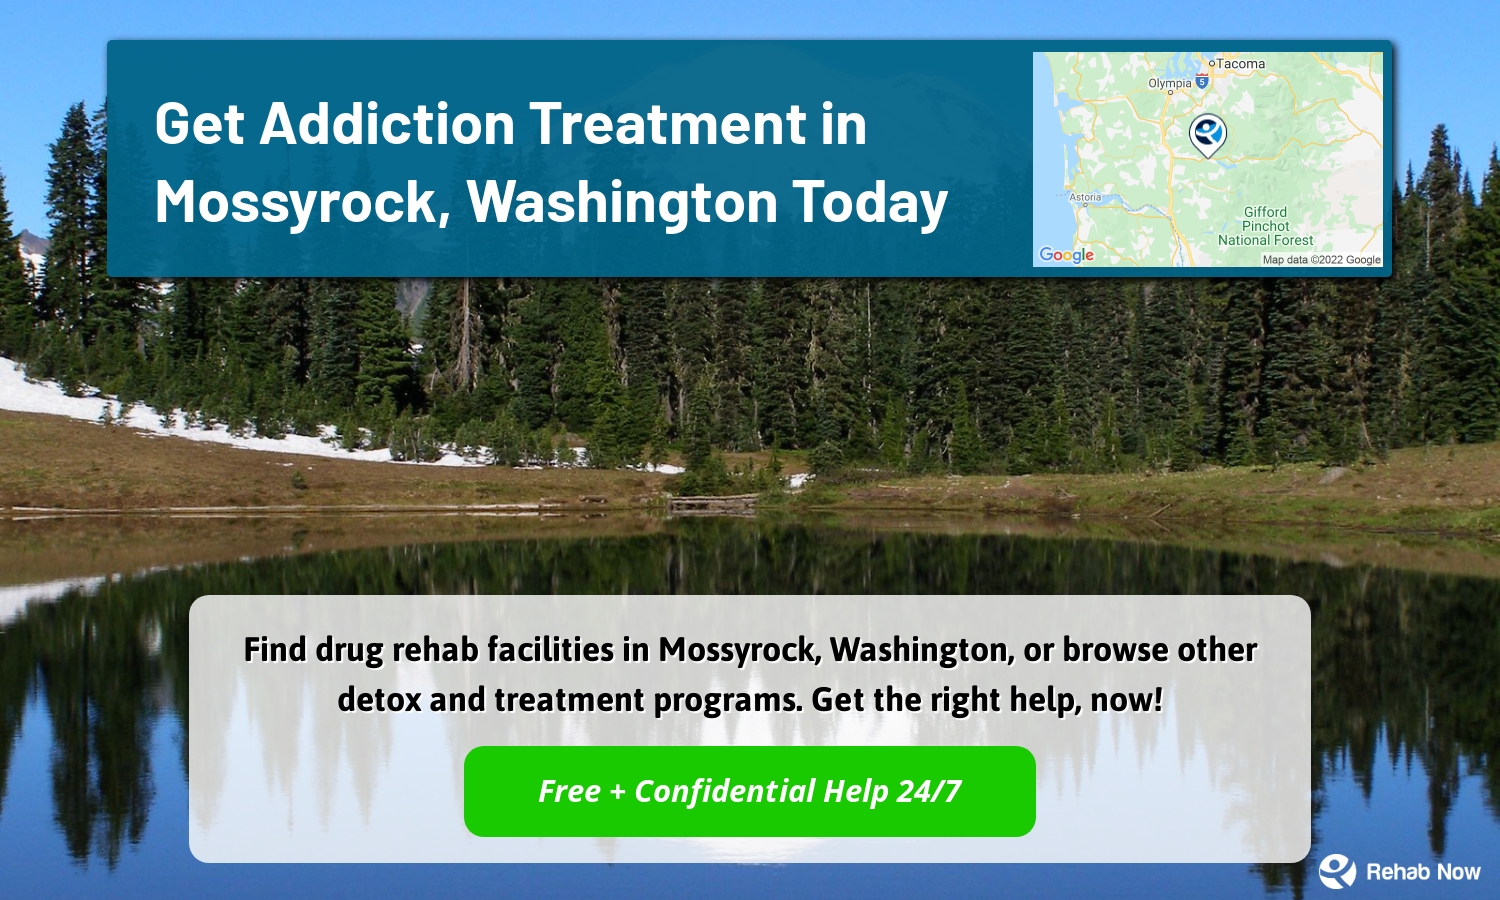 Find drug rehab facilities in Mossyrock, Washington, or browse other detox and treatment programs. Get the right help, now!